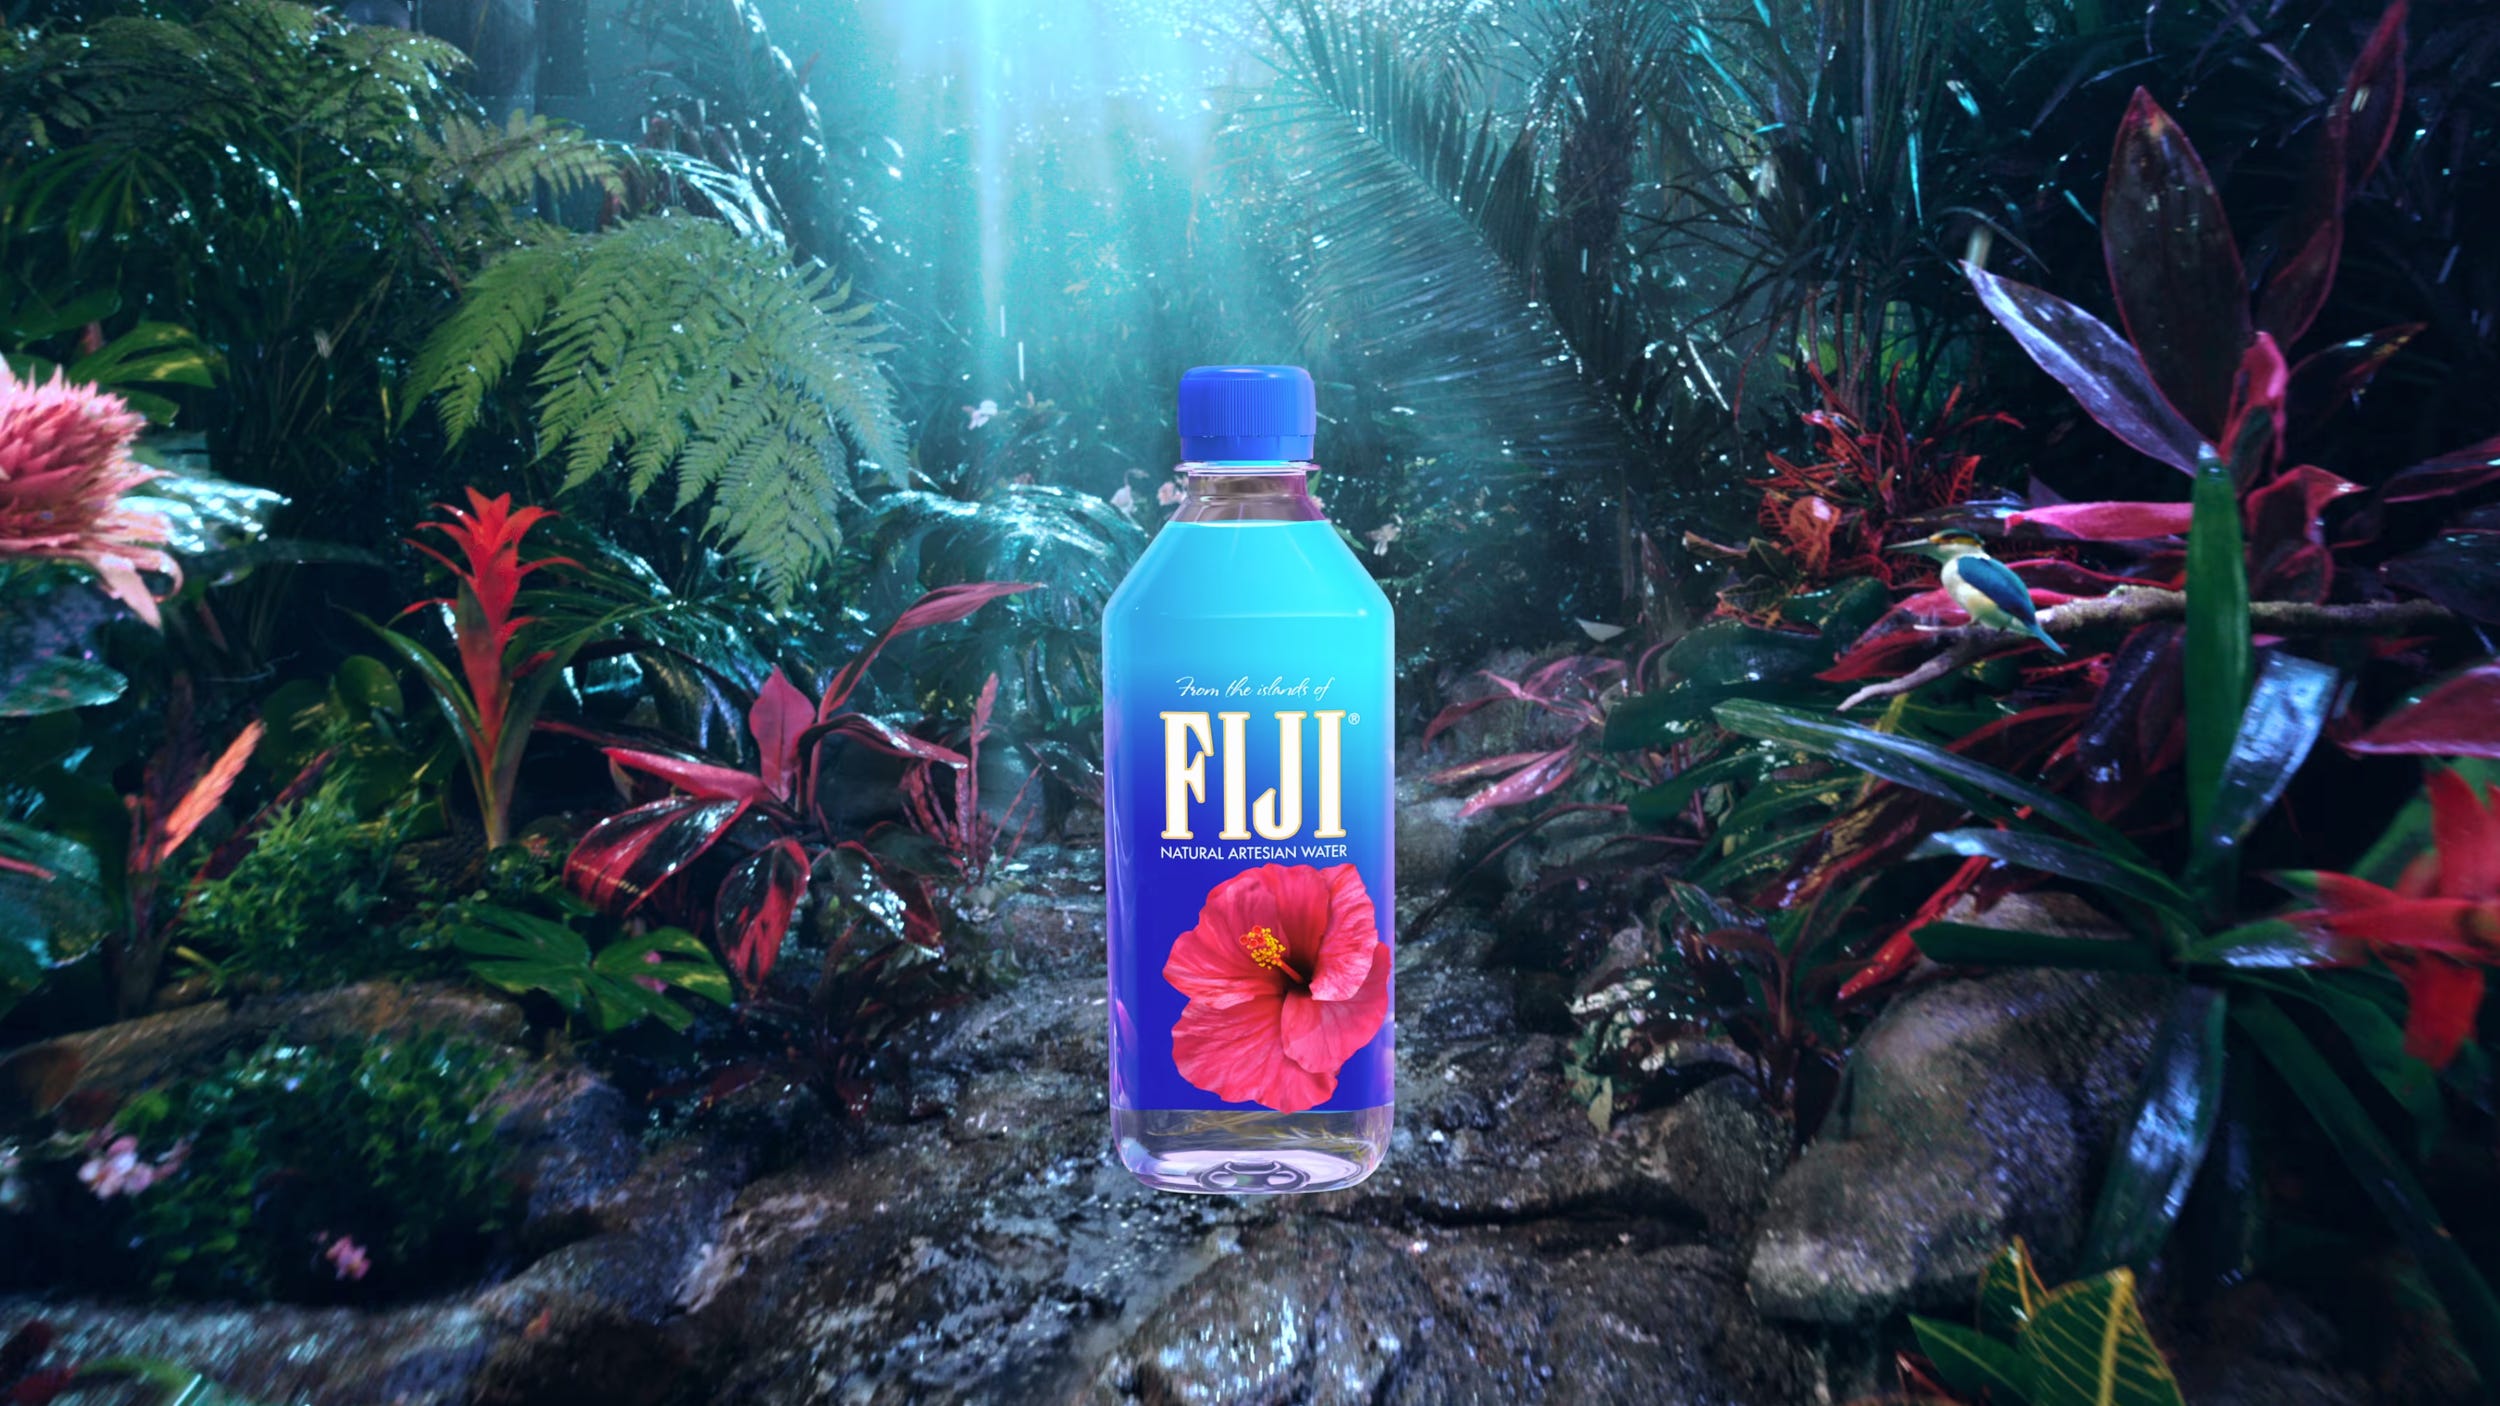 What makes Fiji water so special? by Alias The BURNER